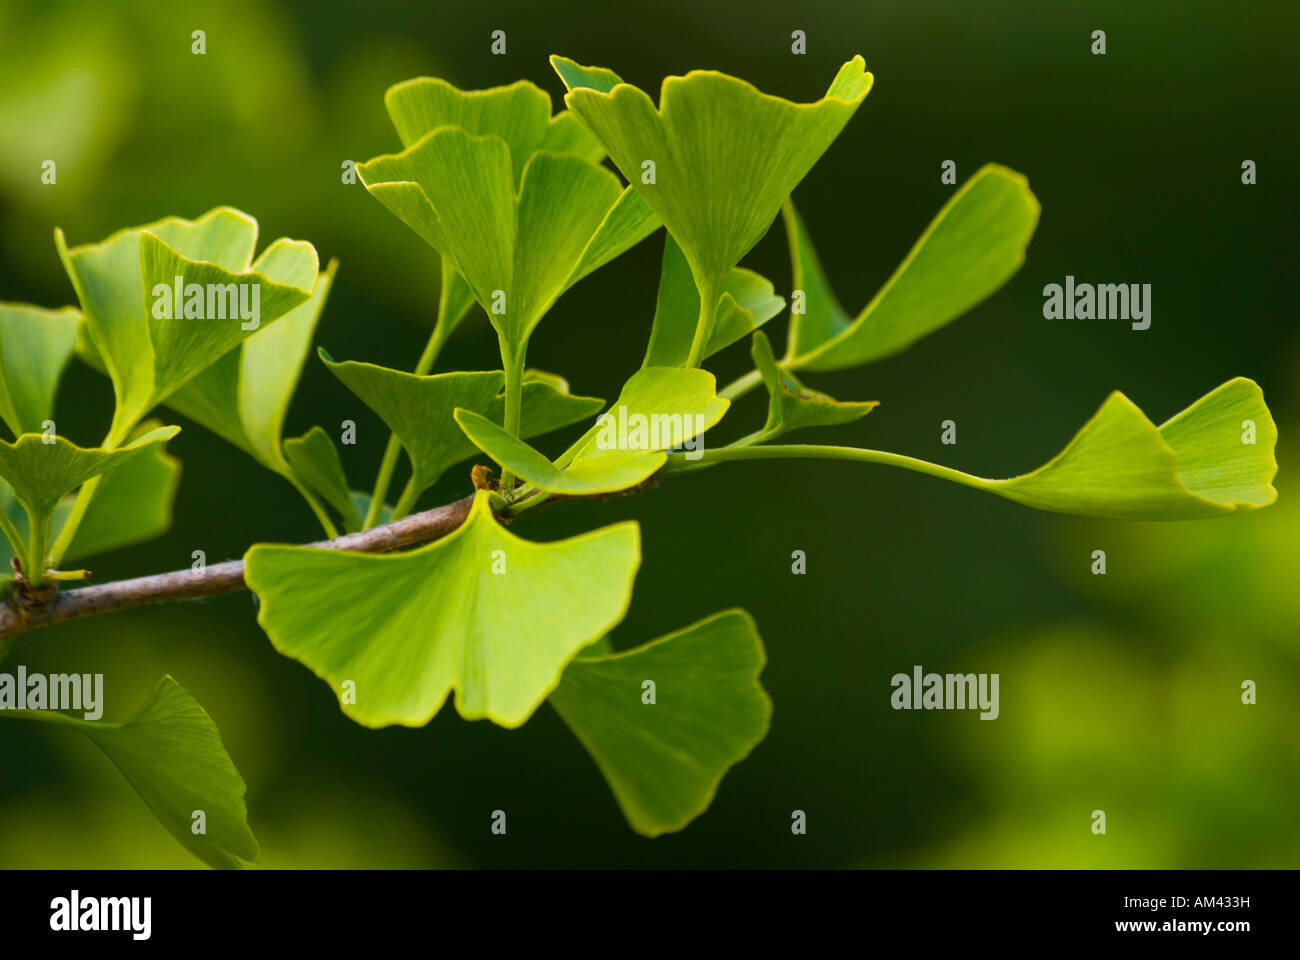 The leaves of the Ginkgo biloba tree, often used in herbal medicine and remedies and described as a living fossil. Stock Photo